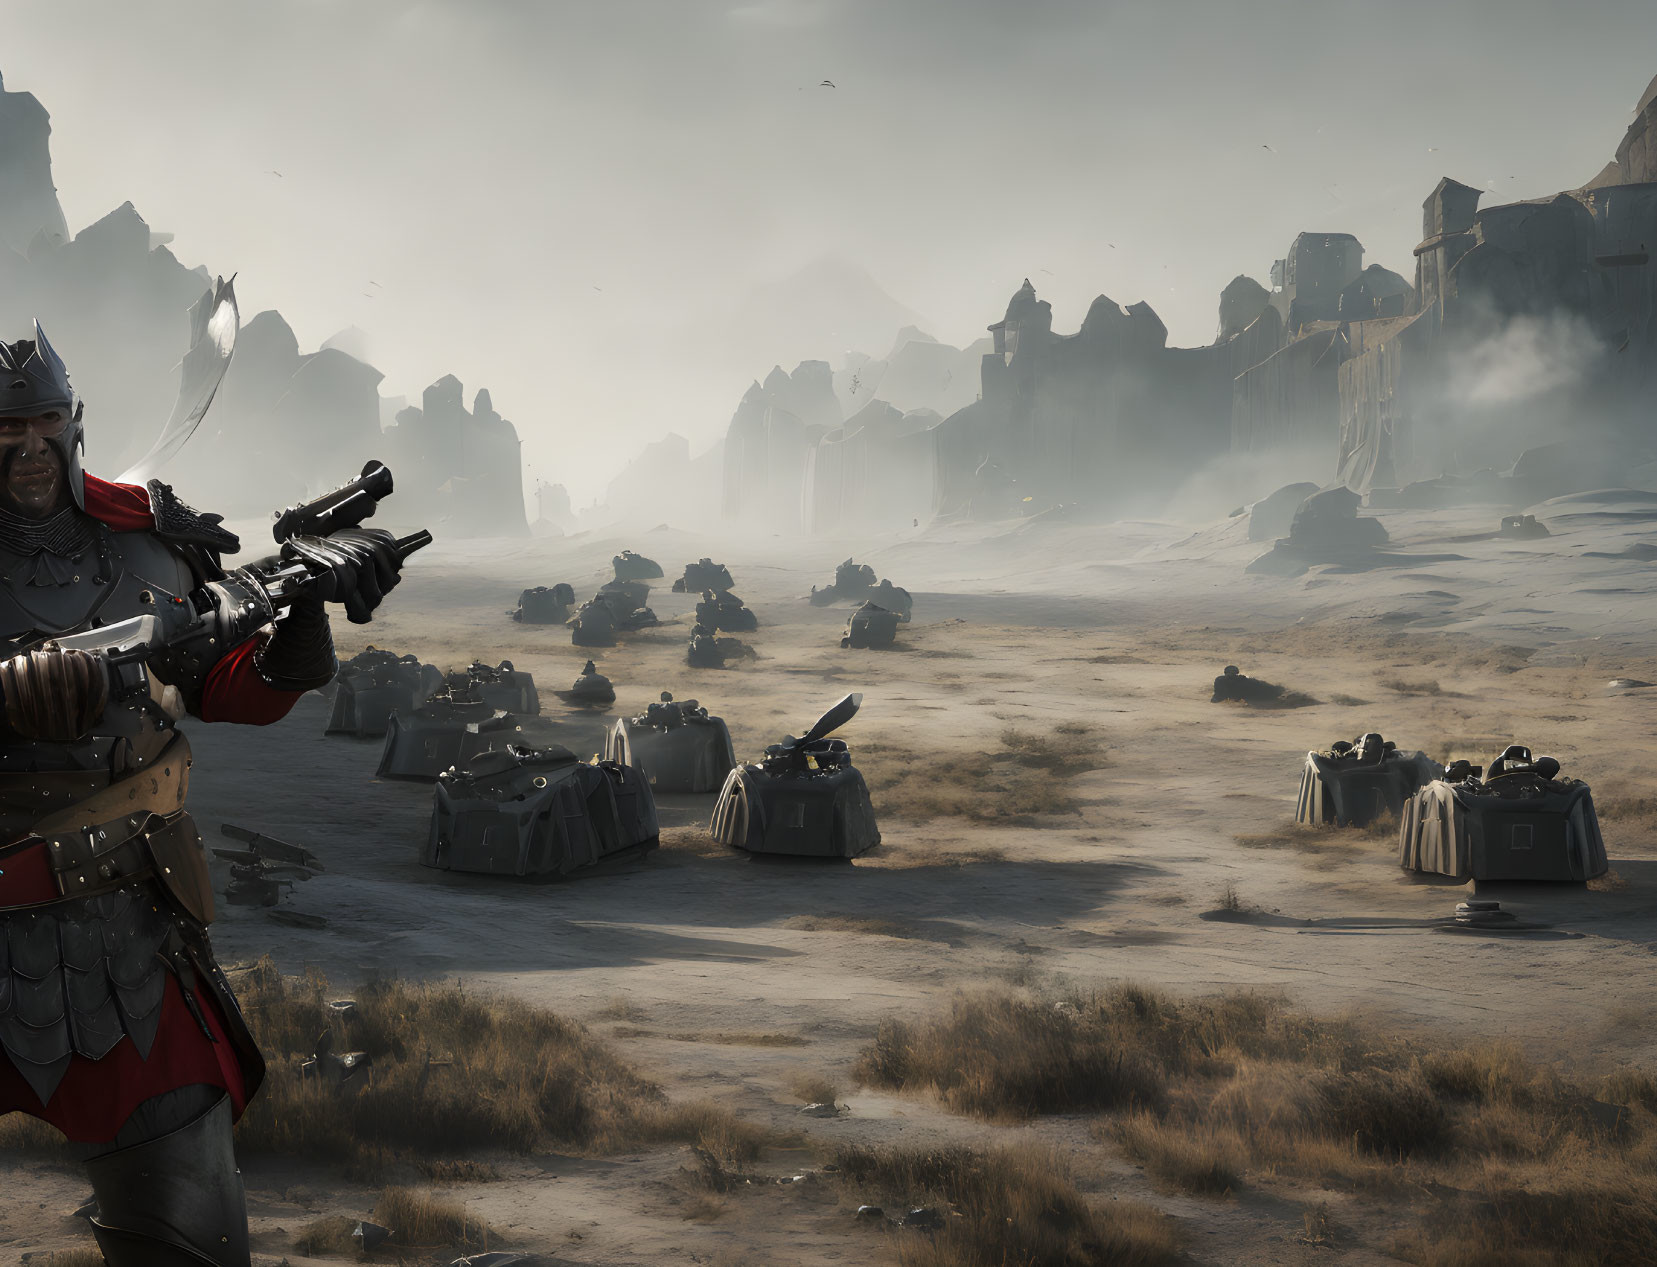 Futuristic knight in armor with weapon in barren landscape with drones.